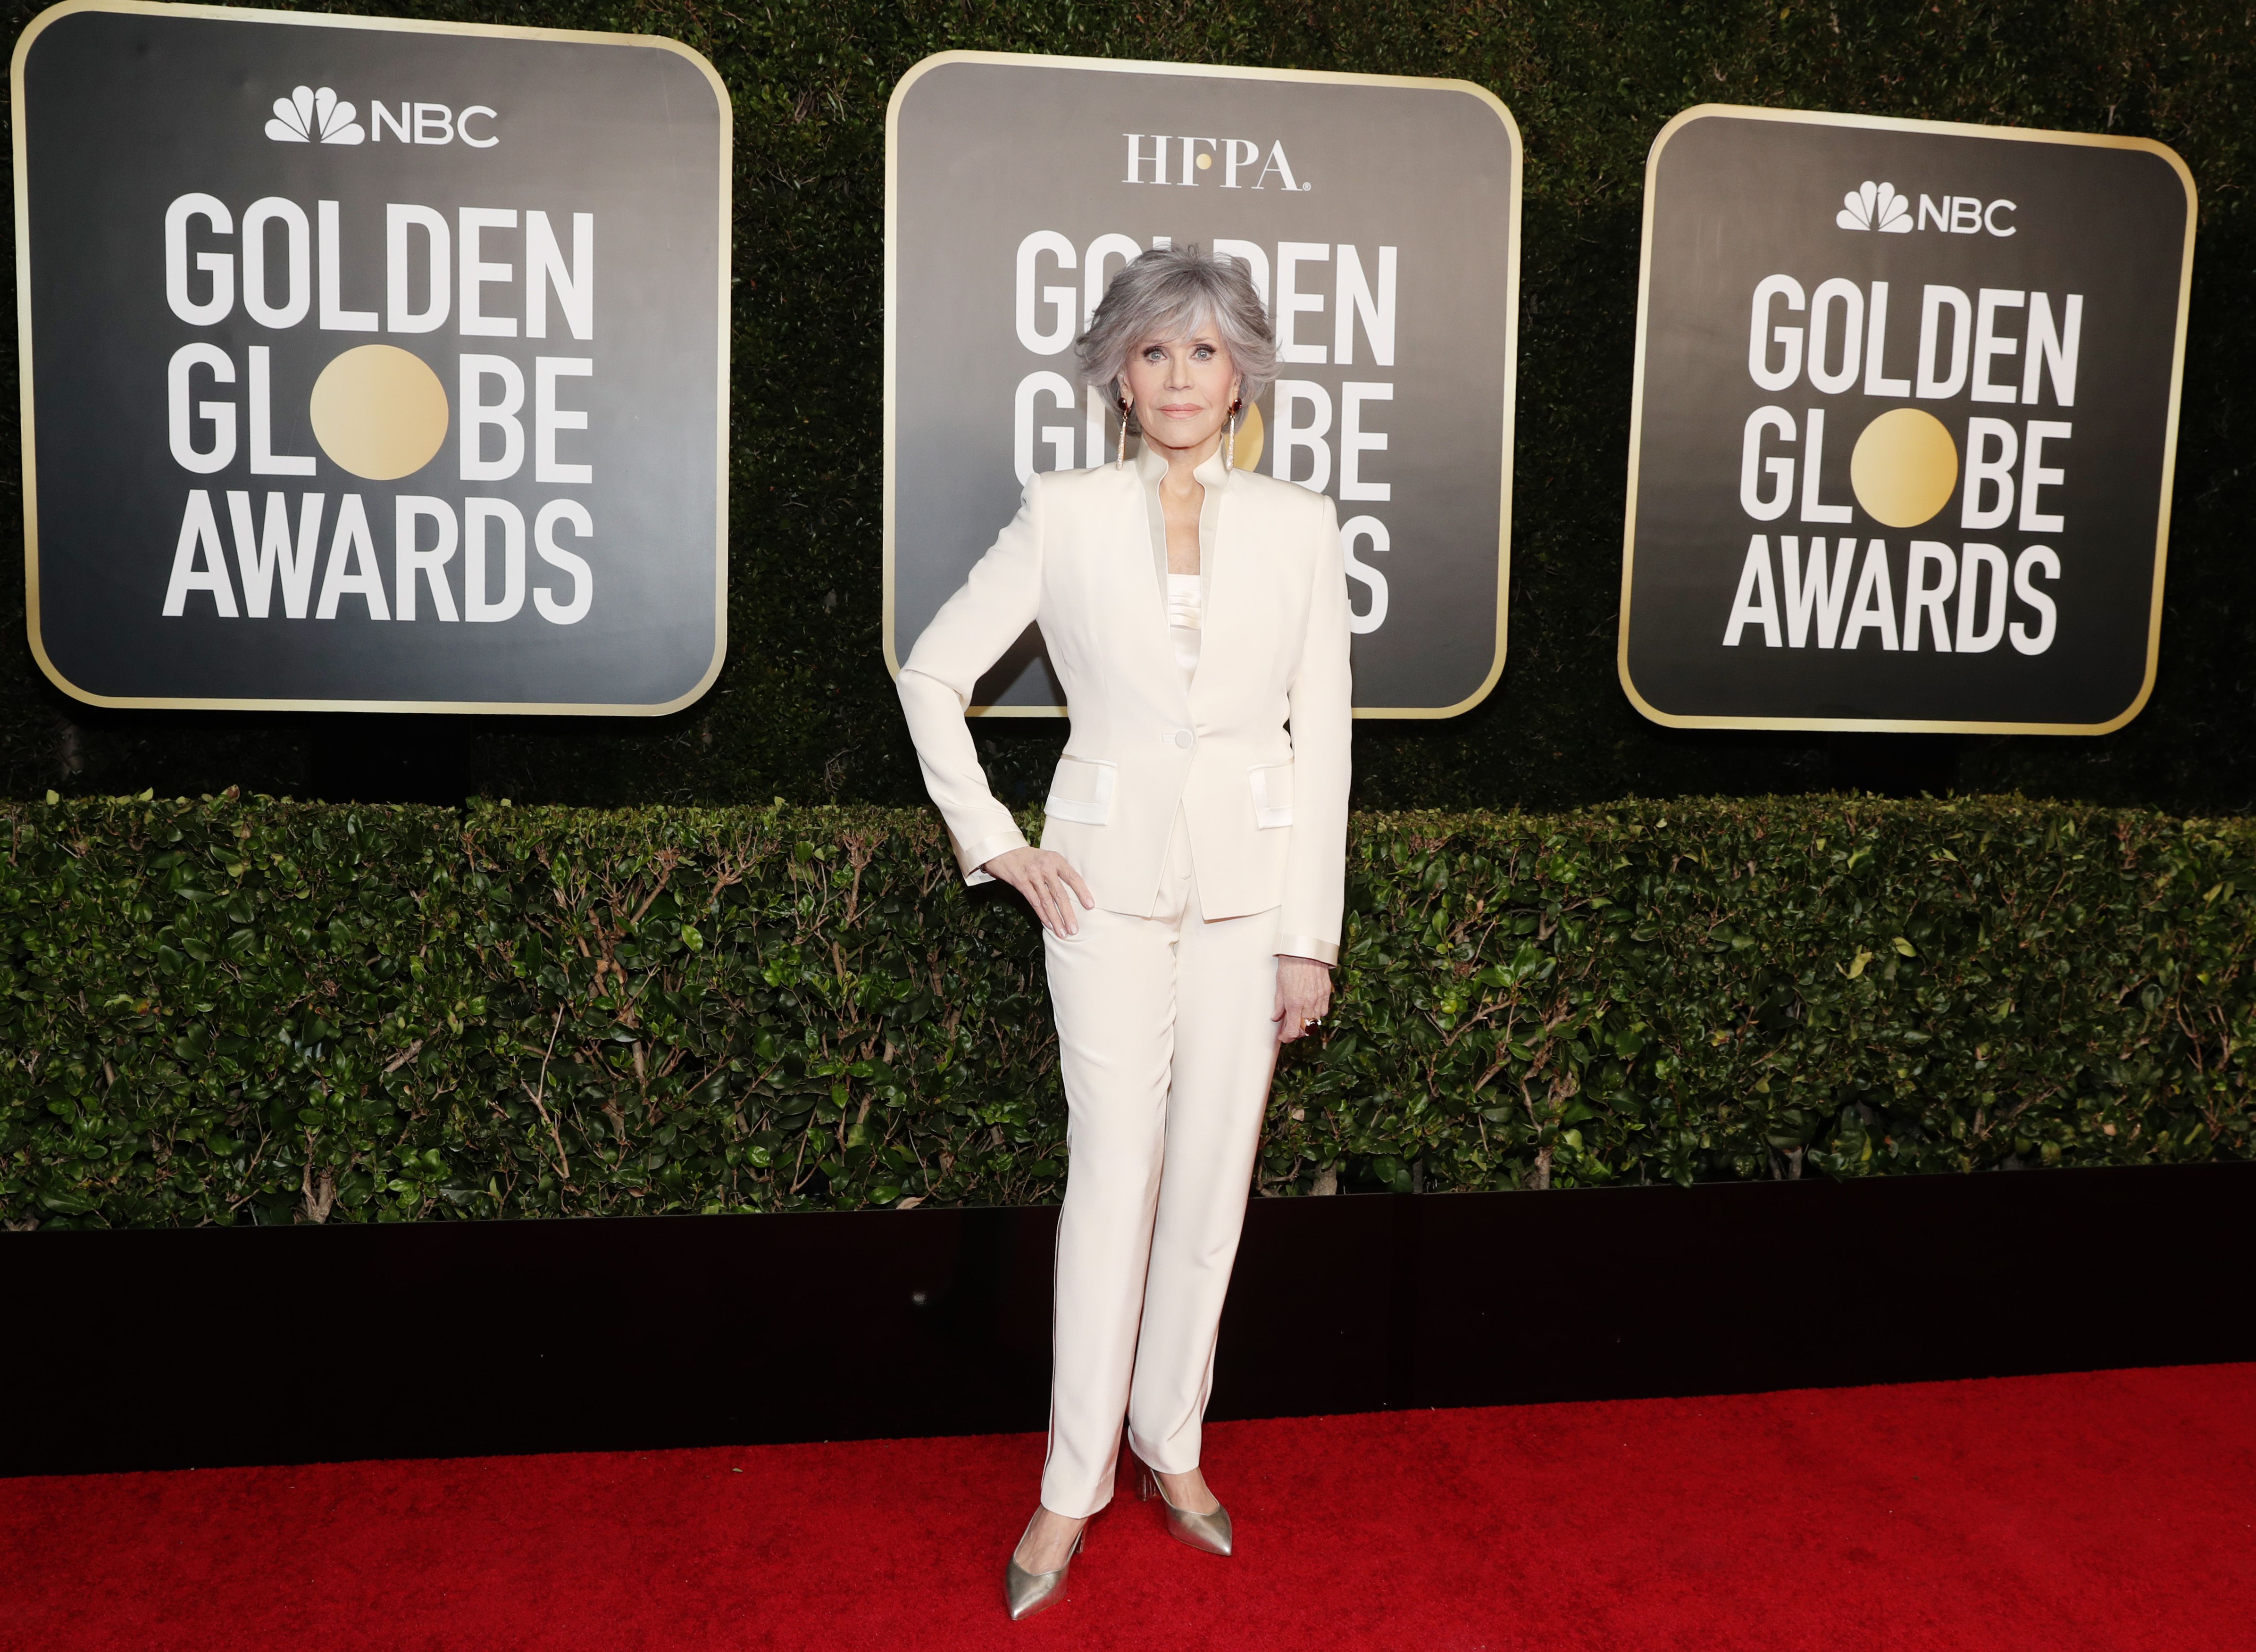 Jane Fonda Re-wears a Chic White Suit to the 2021 Golden Globes